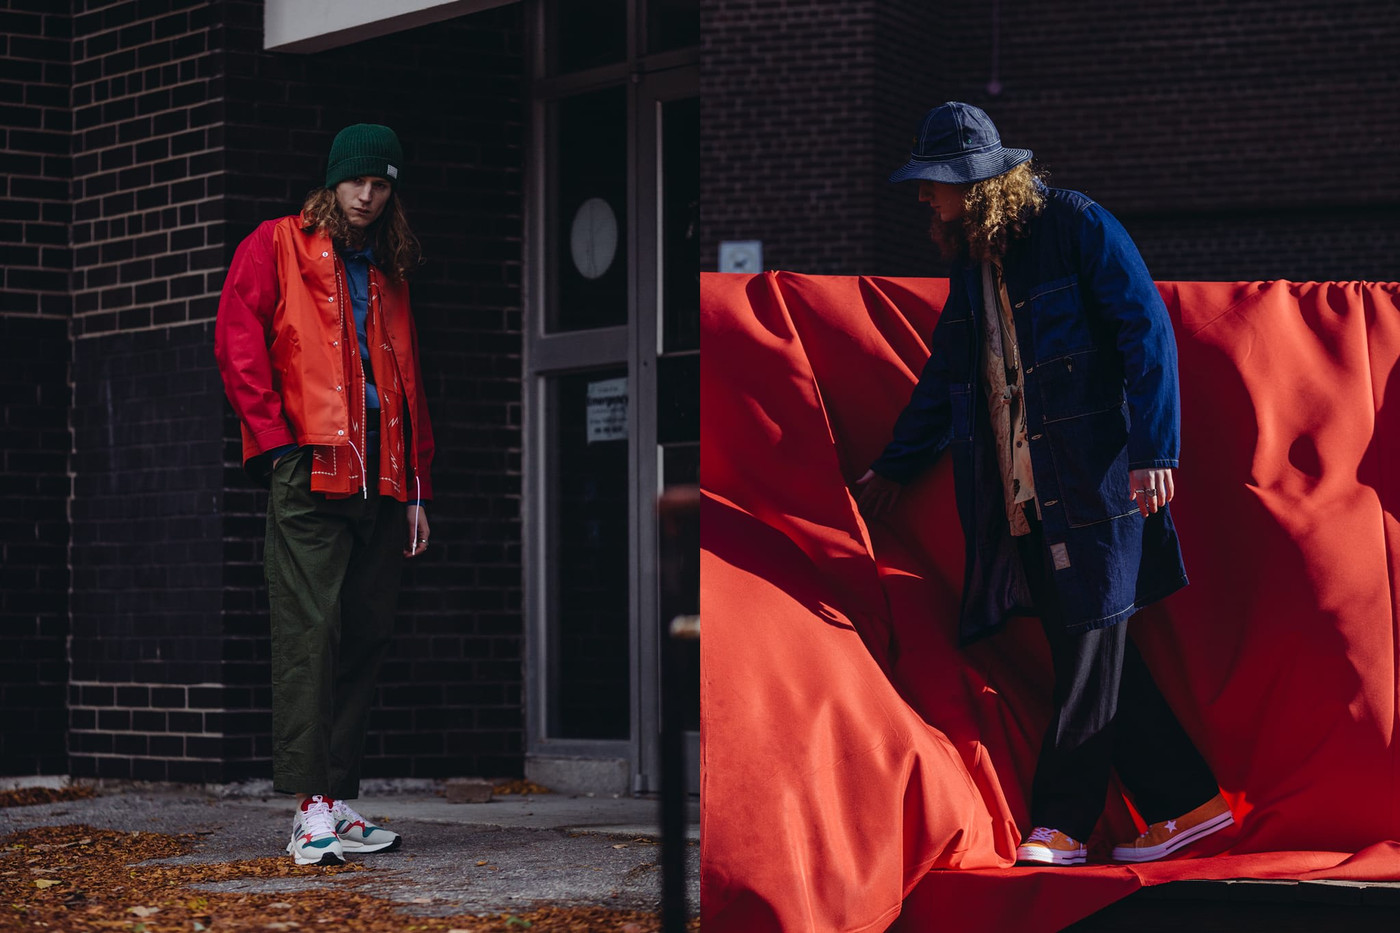 HAVEN Displays Their Latest FW18 Goods in Their New “Like This Like That” Editorial